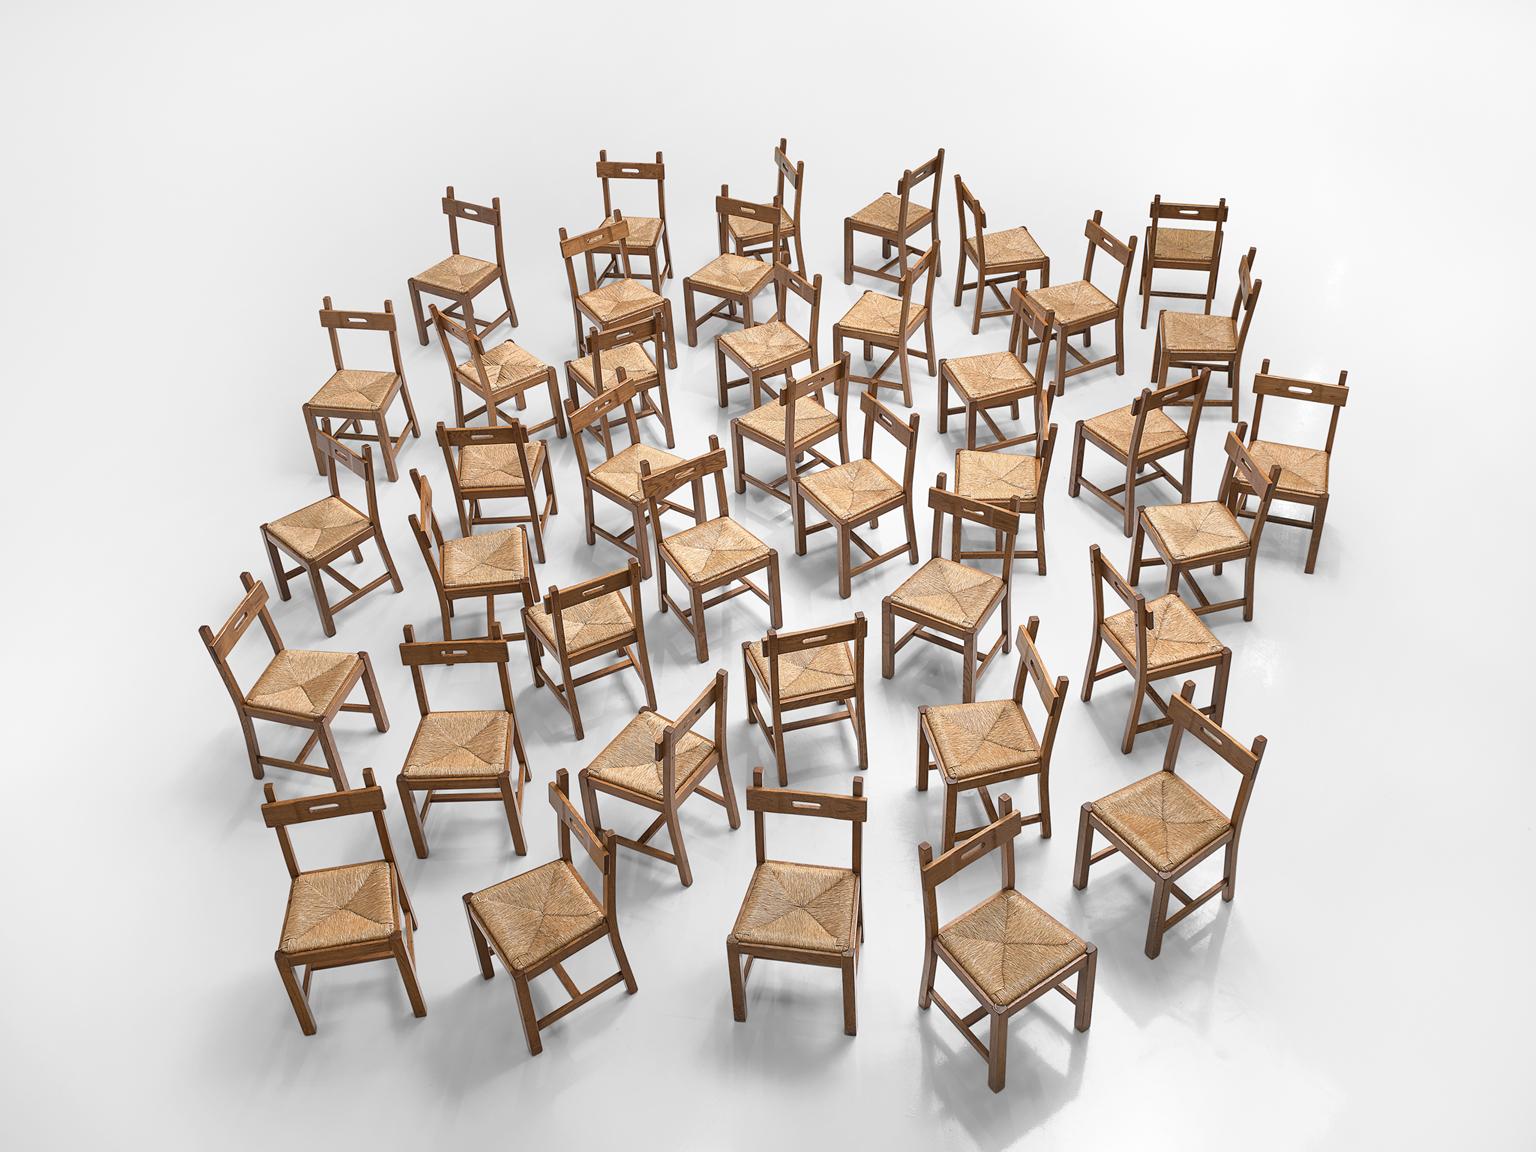 Set of 40 chairs, oak, Belgium, 1960s.

Large set of chairs are executed in oak which has gained a rich patina over time and a seat of cord. The chairs have a very solid and geometric backrest. The chairs are both functional and clear in their